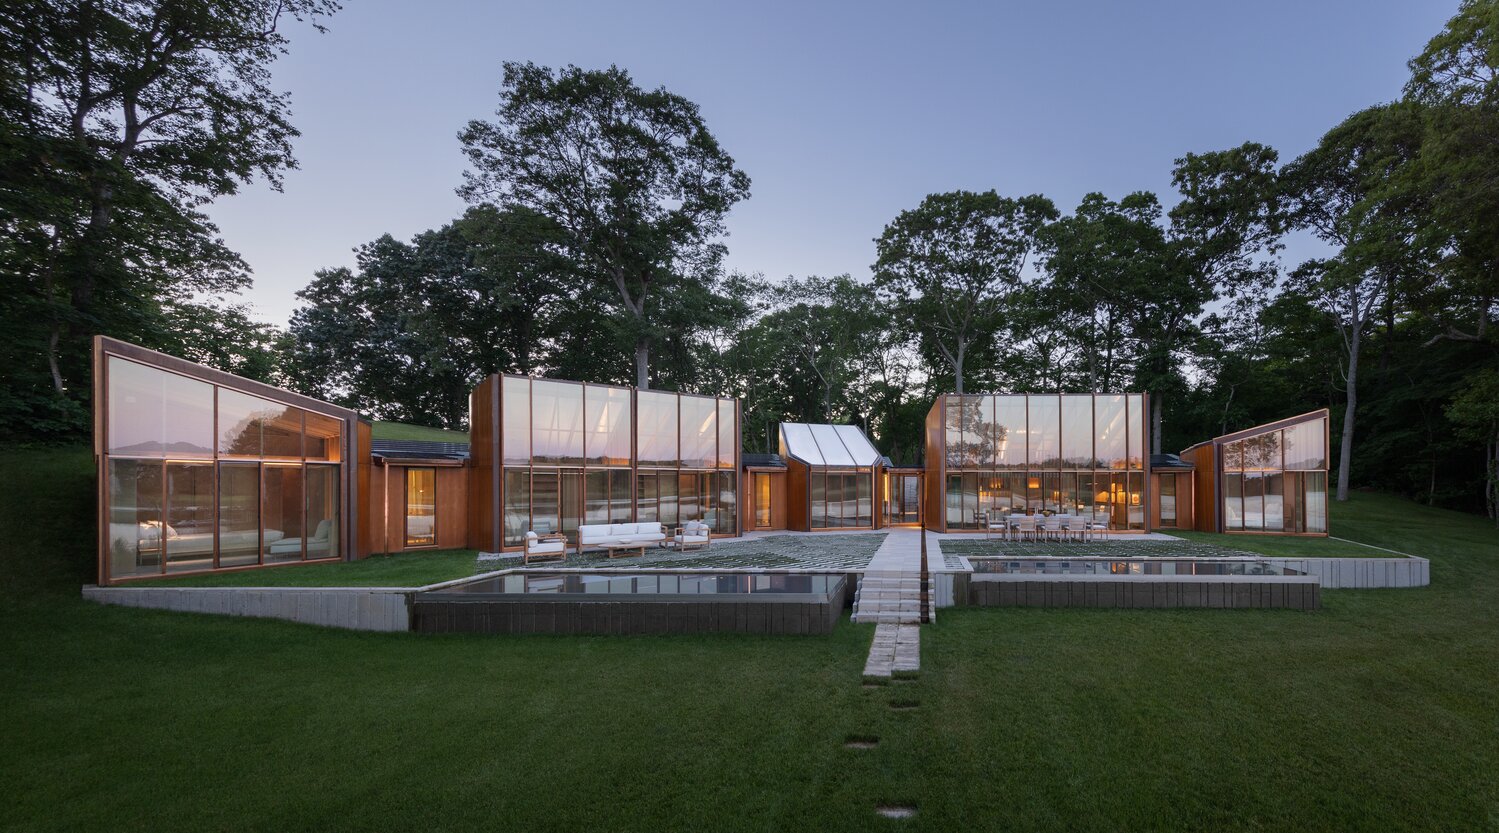 This view shows all five pavilions, with “guest” bedrooms to the left, main living space in the center, and master bedroom to the right. The entire structure is designed in a crescent shape, so it gently wraps around and encloses the terrace.